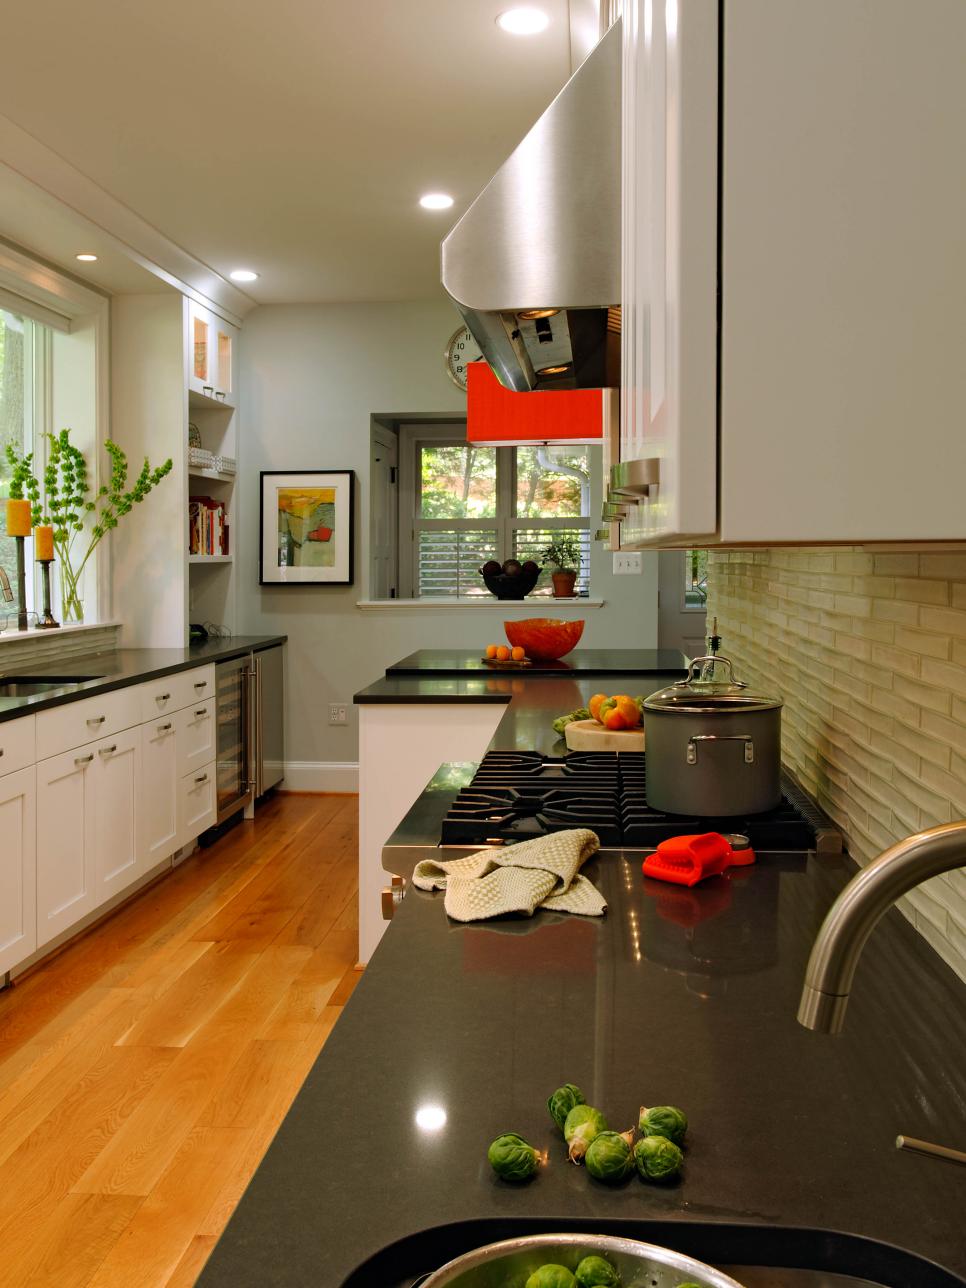 Contemporary Kitchen With White Cabinets, Black Quartz Counters and Red Accents